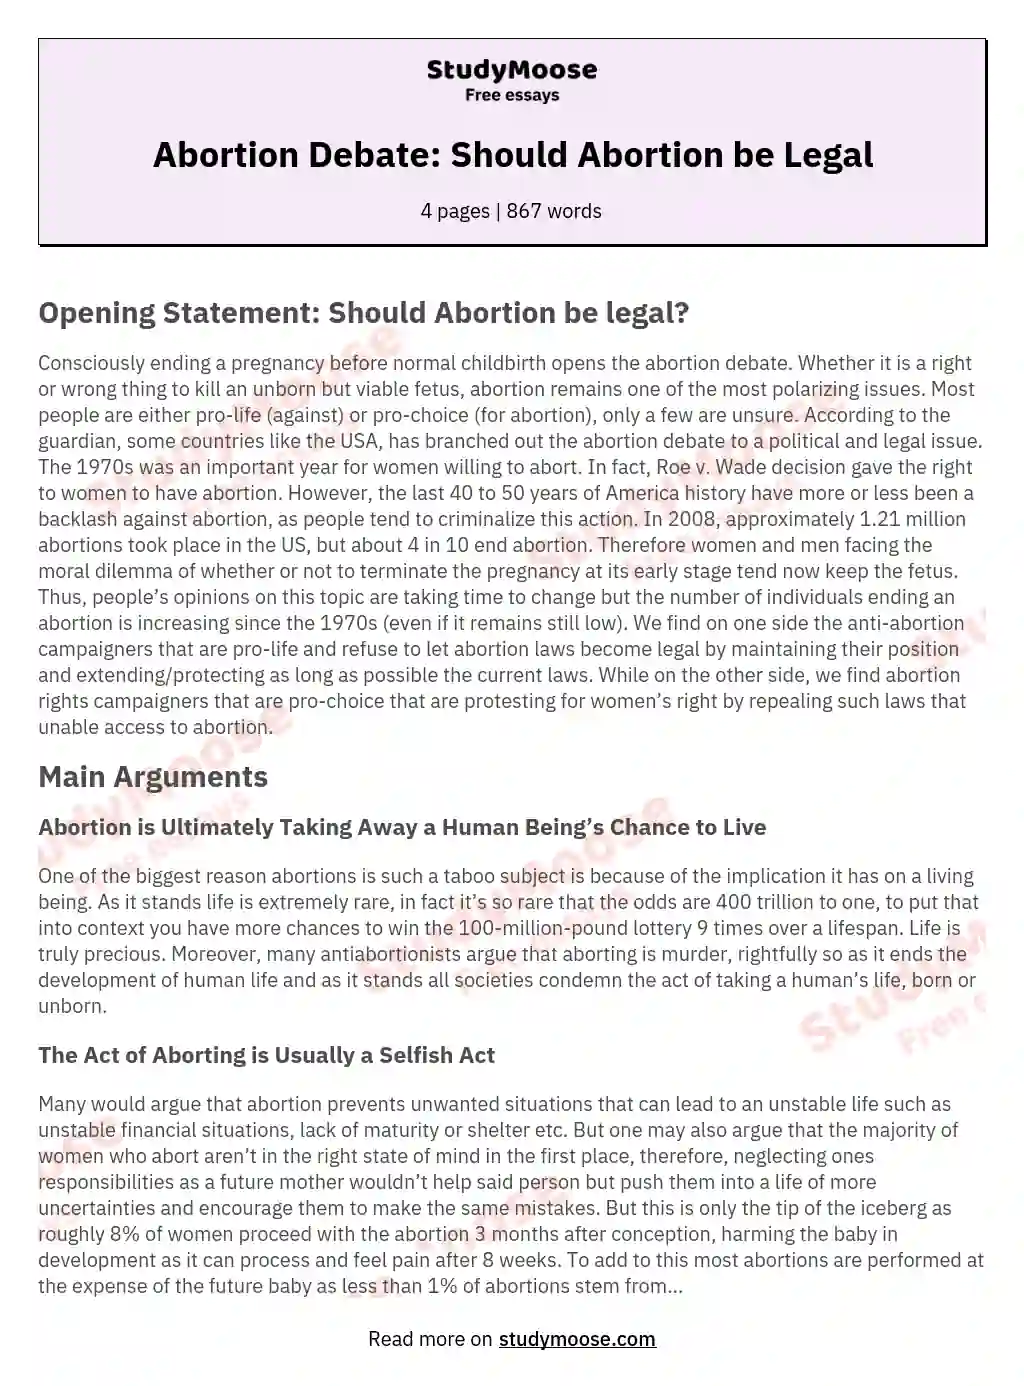 Abortion Debate: Should Abortion be Legal